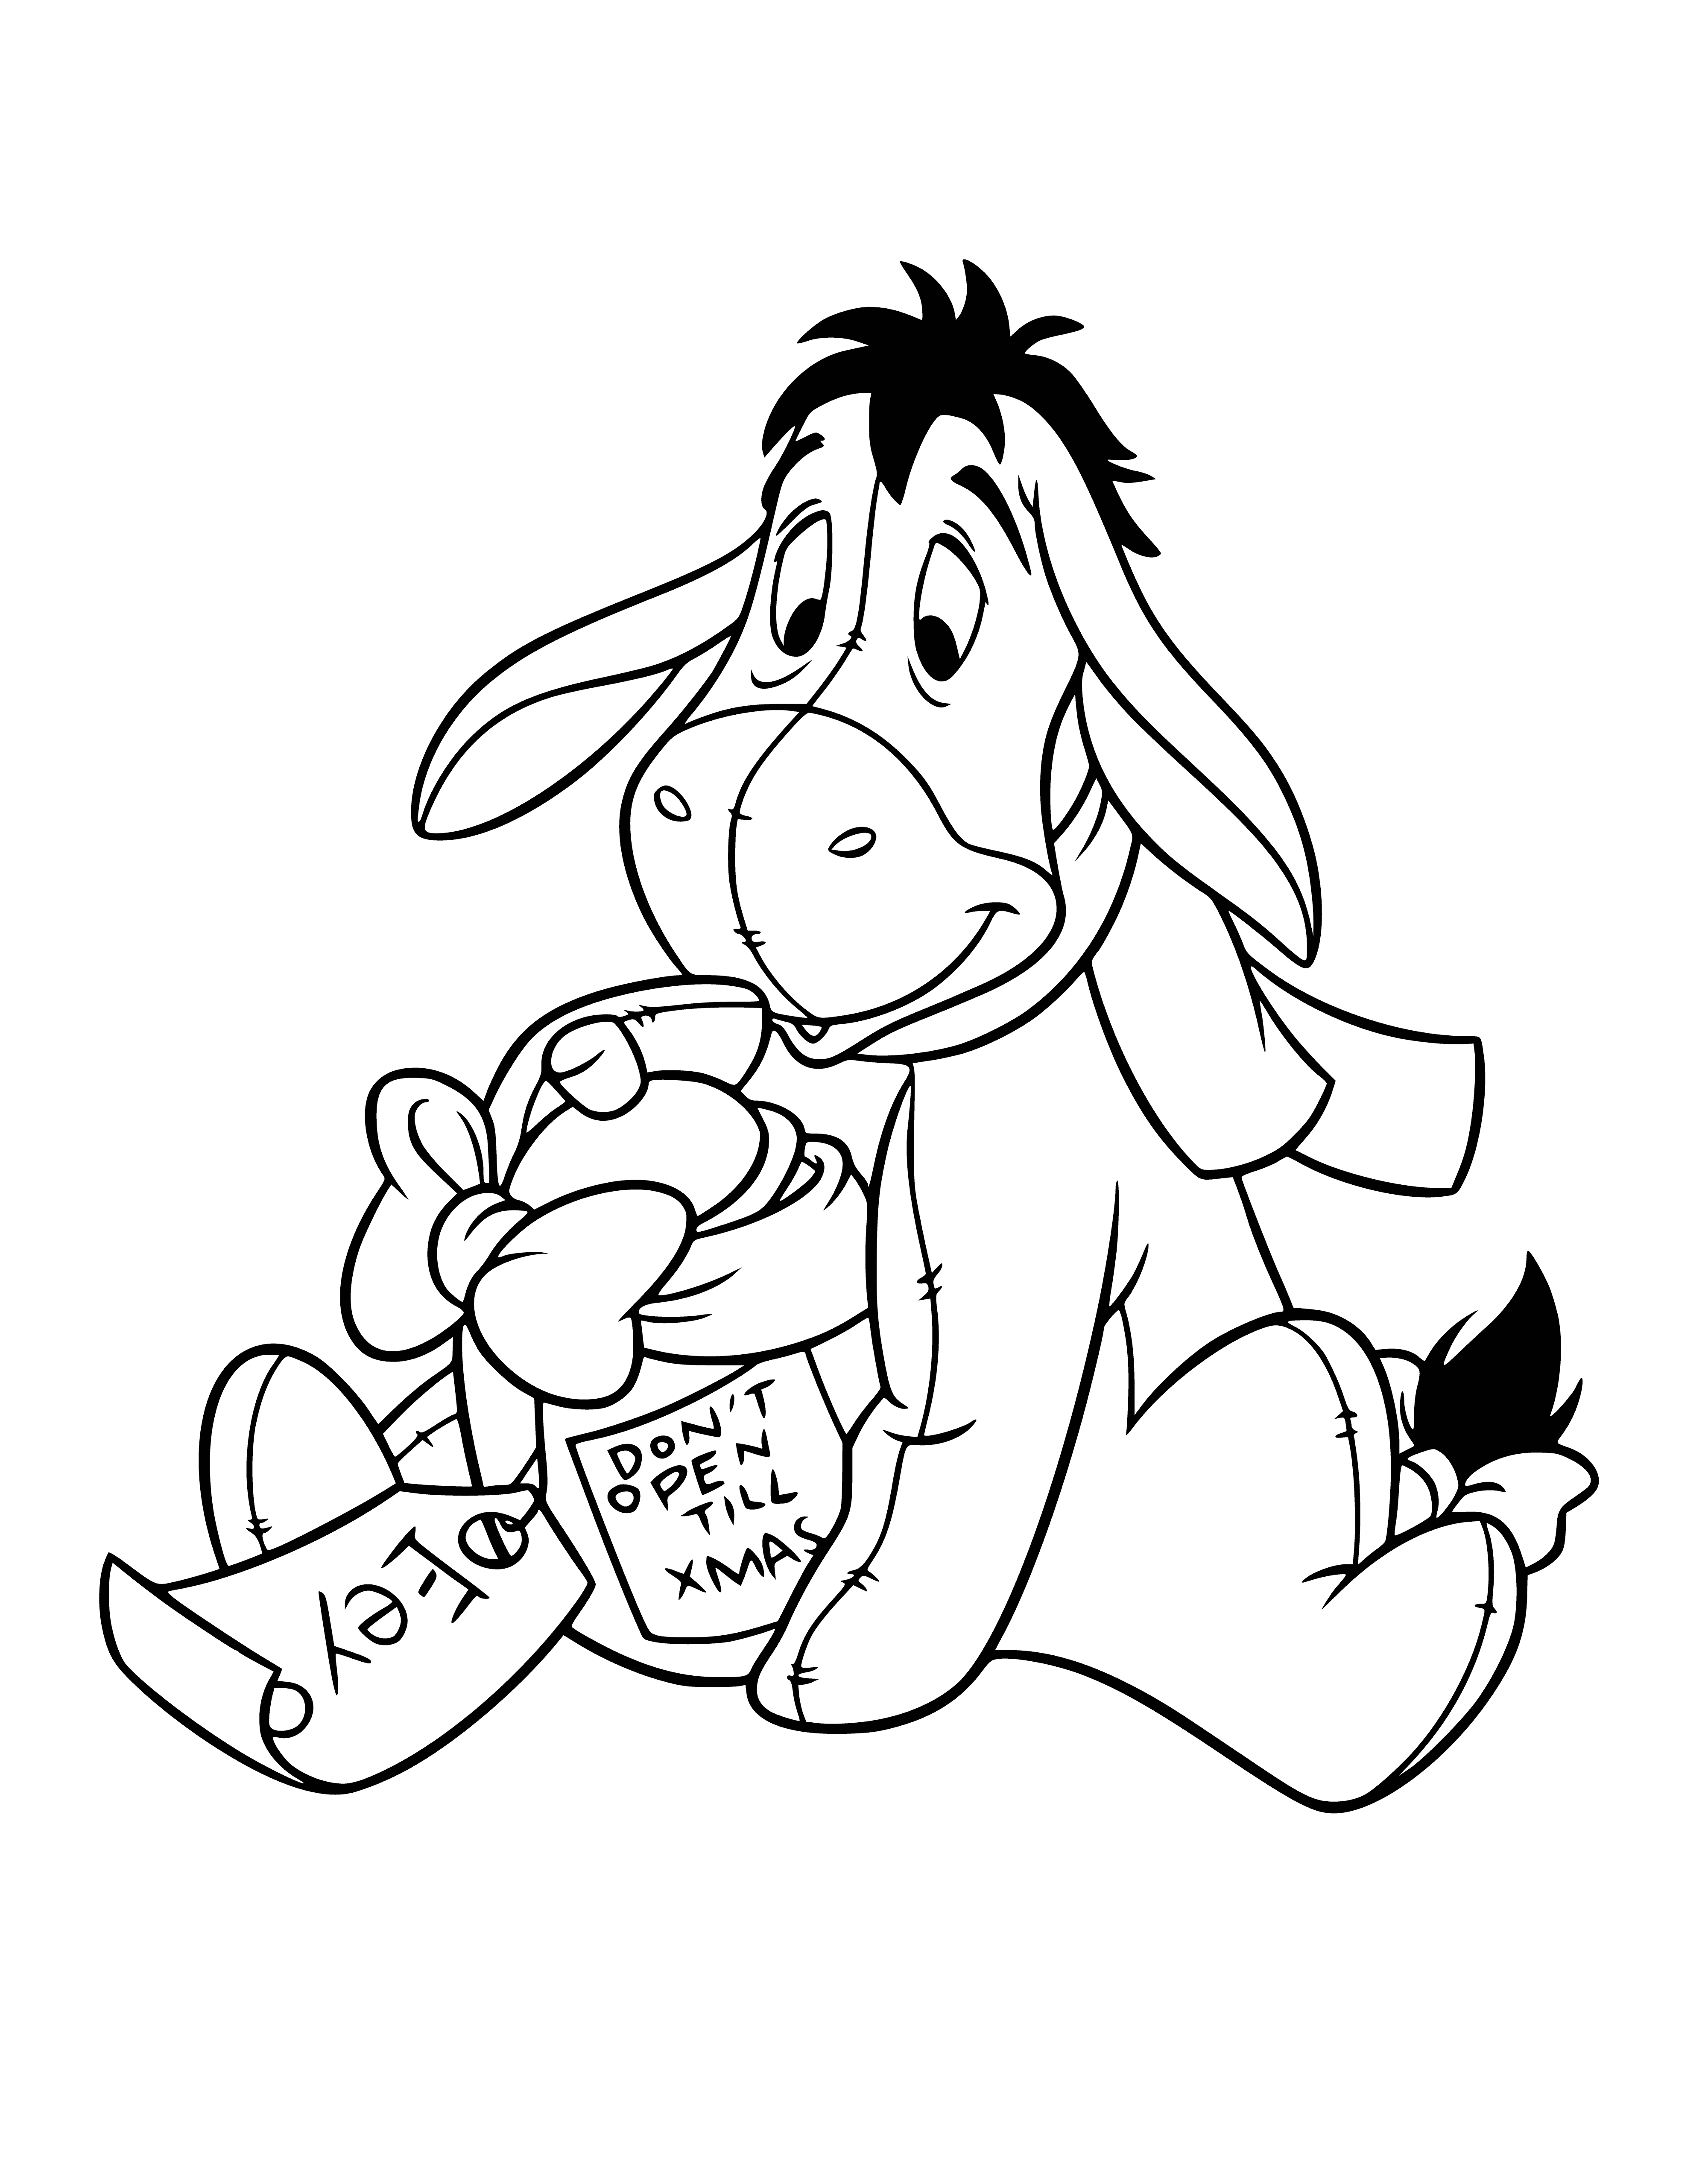 coloring page: Disney characters Eeyore and friends celebrate New Year with gifts, balloons, and joy!